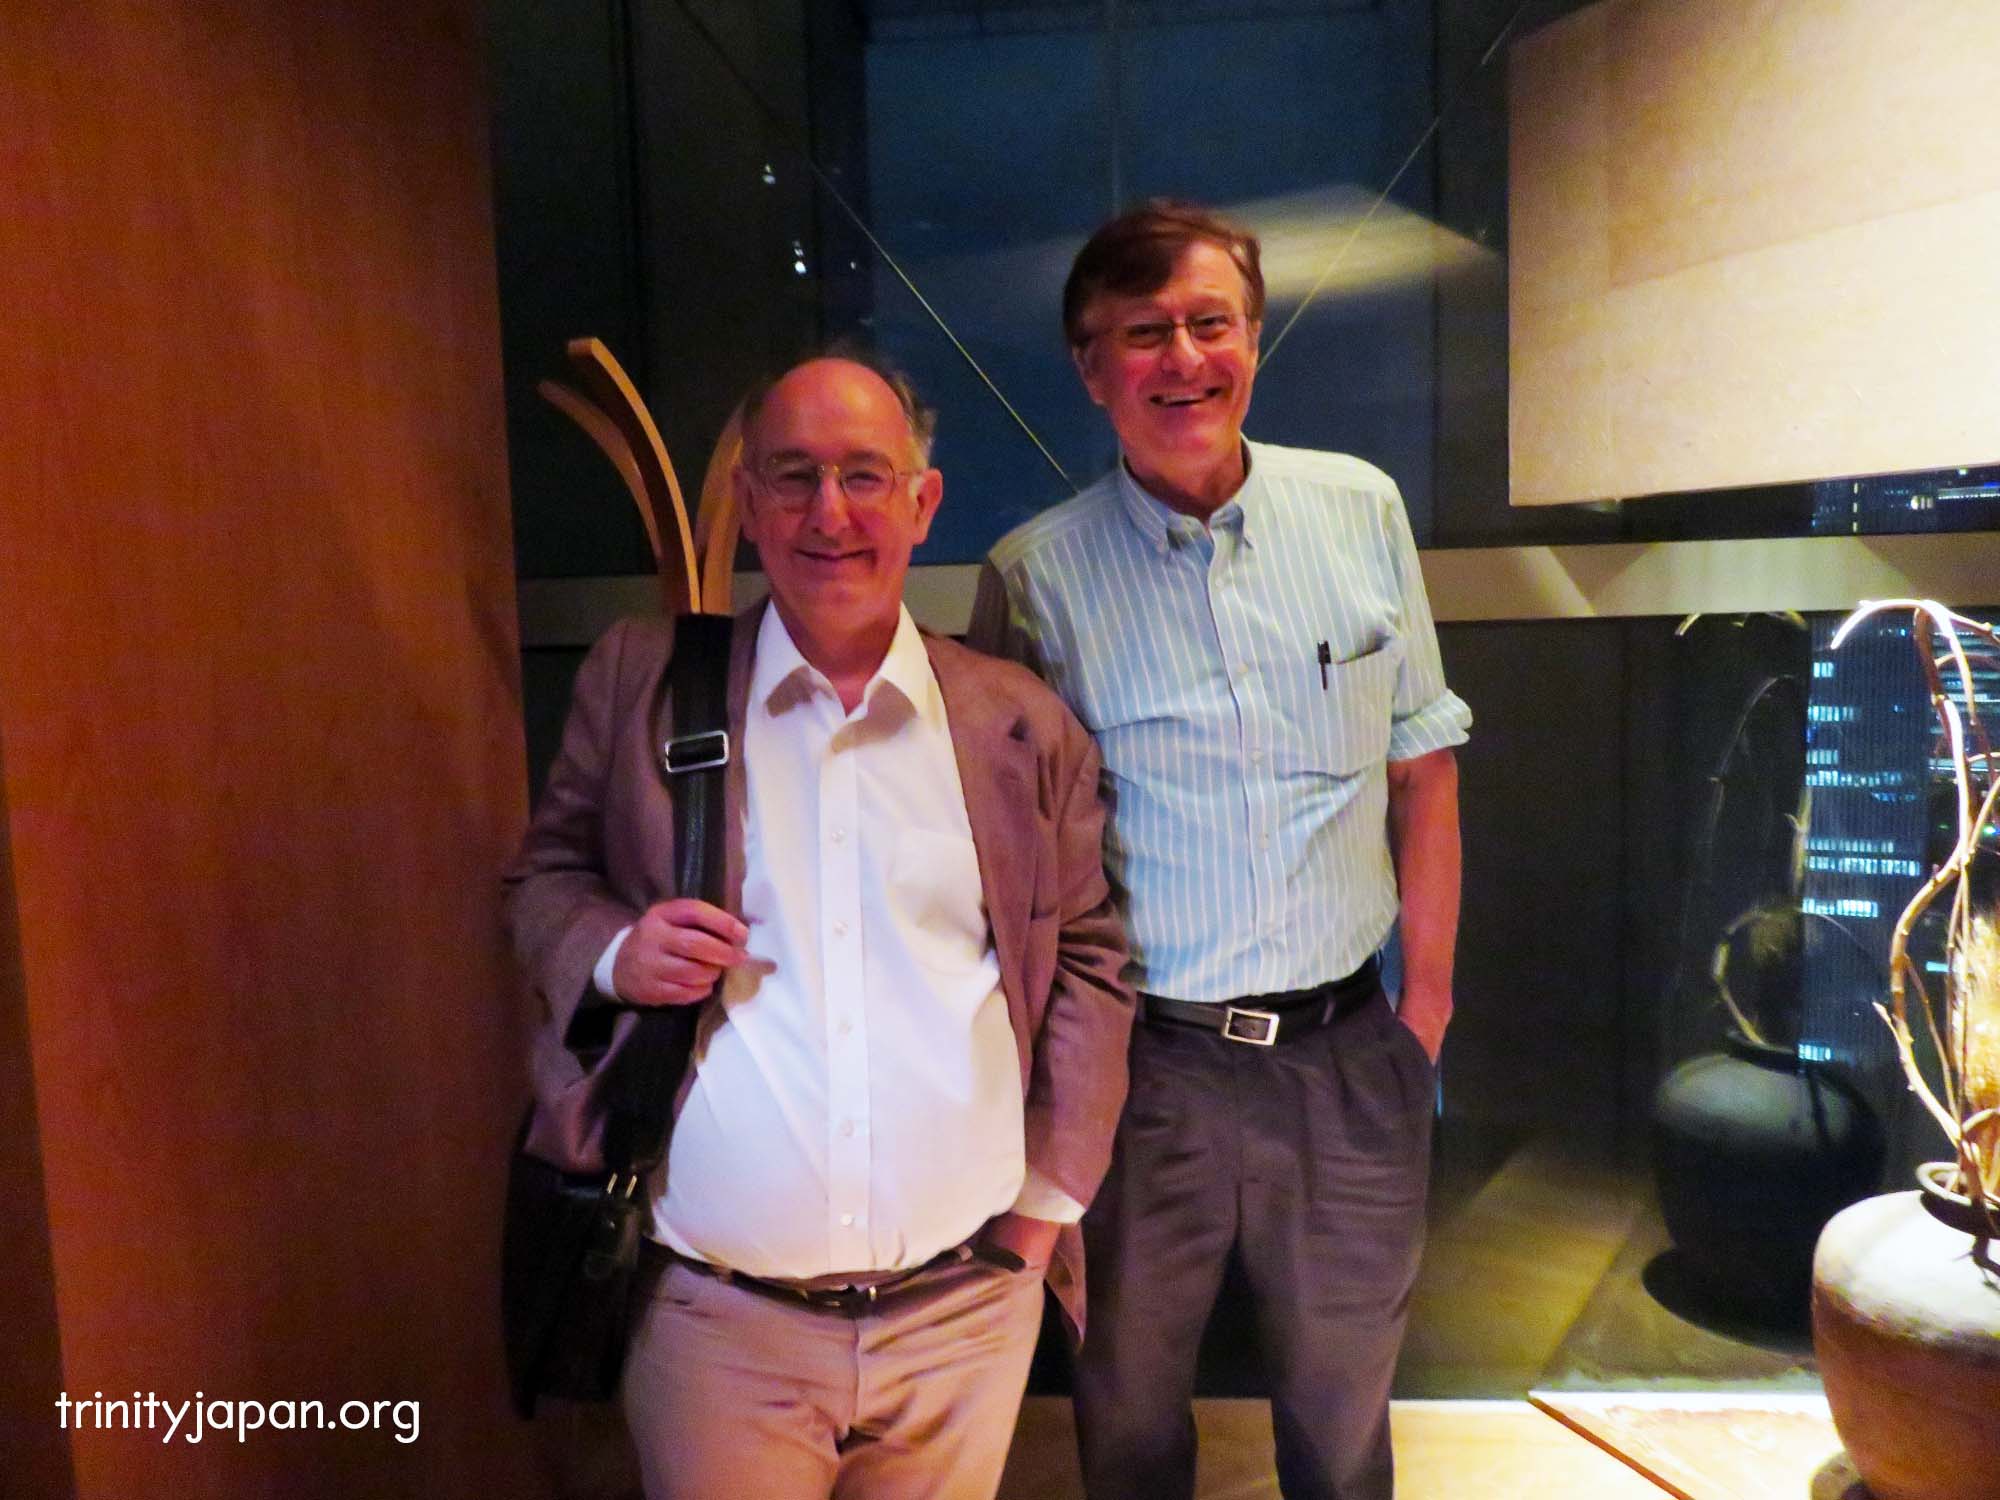 Trinity in Japan Society meeting on Friday 16 September 2016 with Professor Dominic Lieven